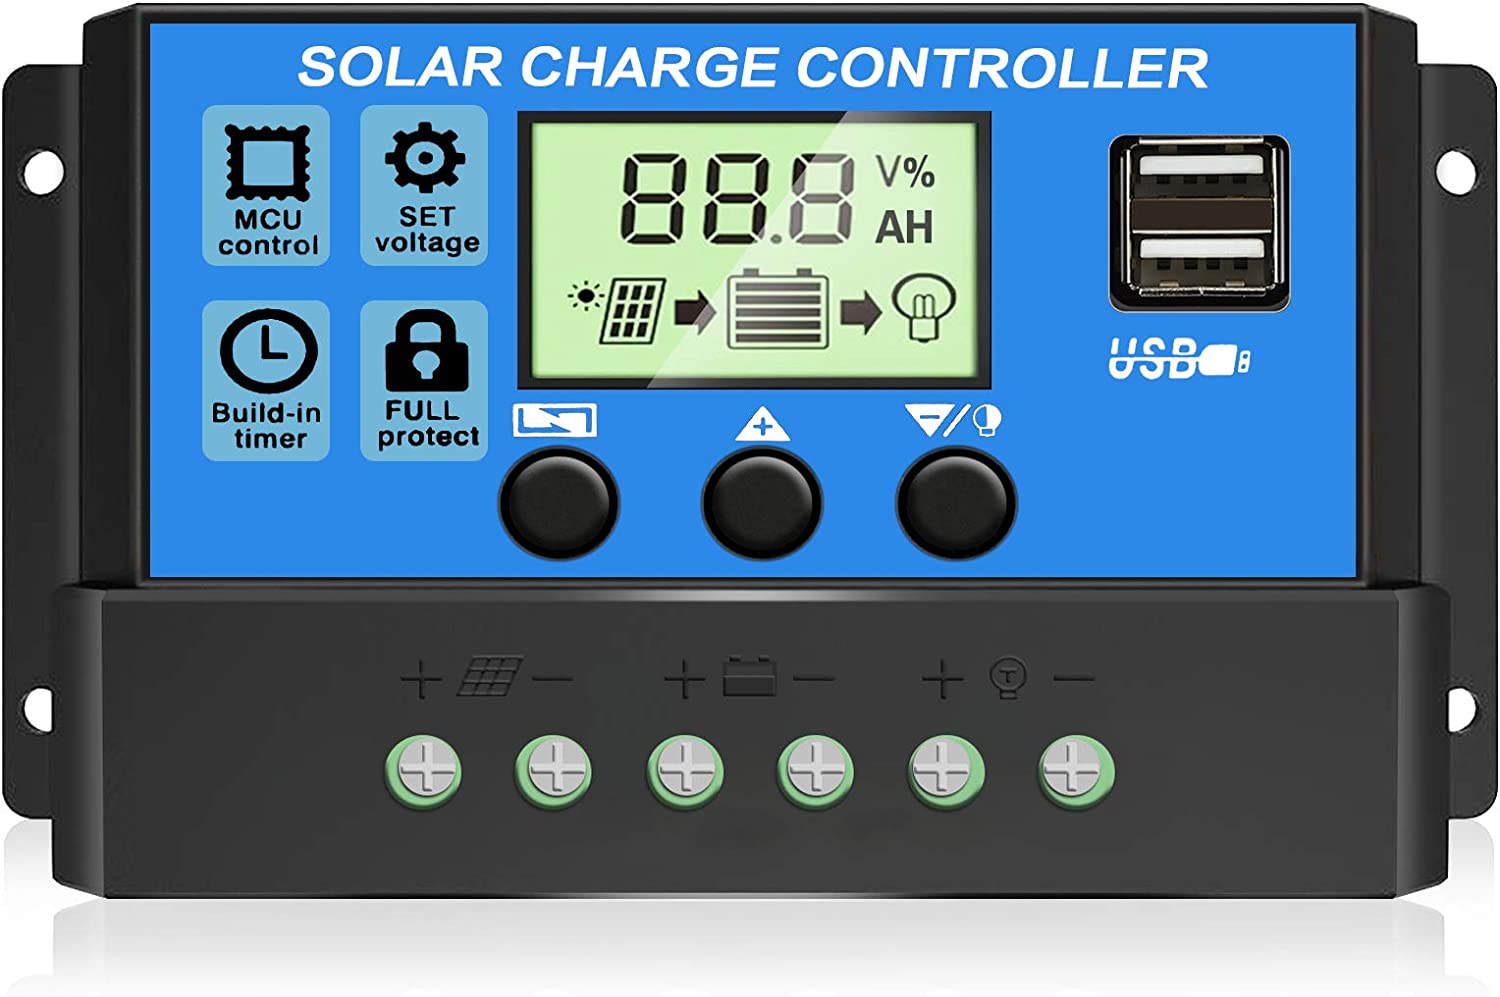 [2022 Upgraded] 30A Solar Charge Controller, 12V/ 24V Solar Panel Regulator with Adjustable LCD Display Dual USB Port Timer Setting PWM Auto Parameter